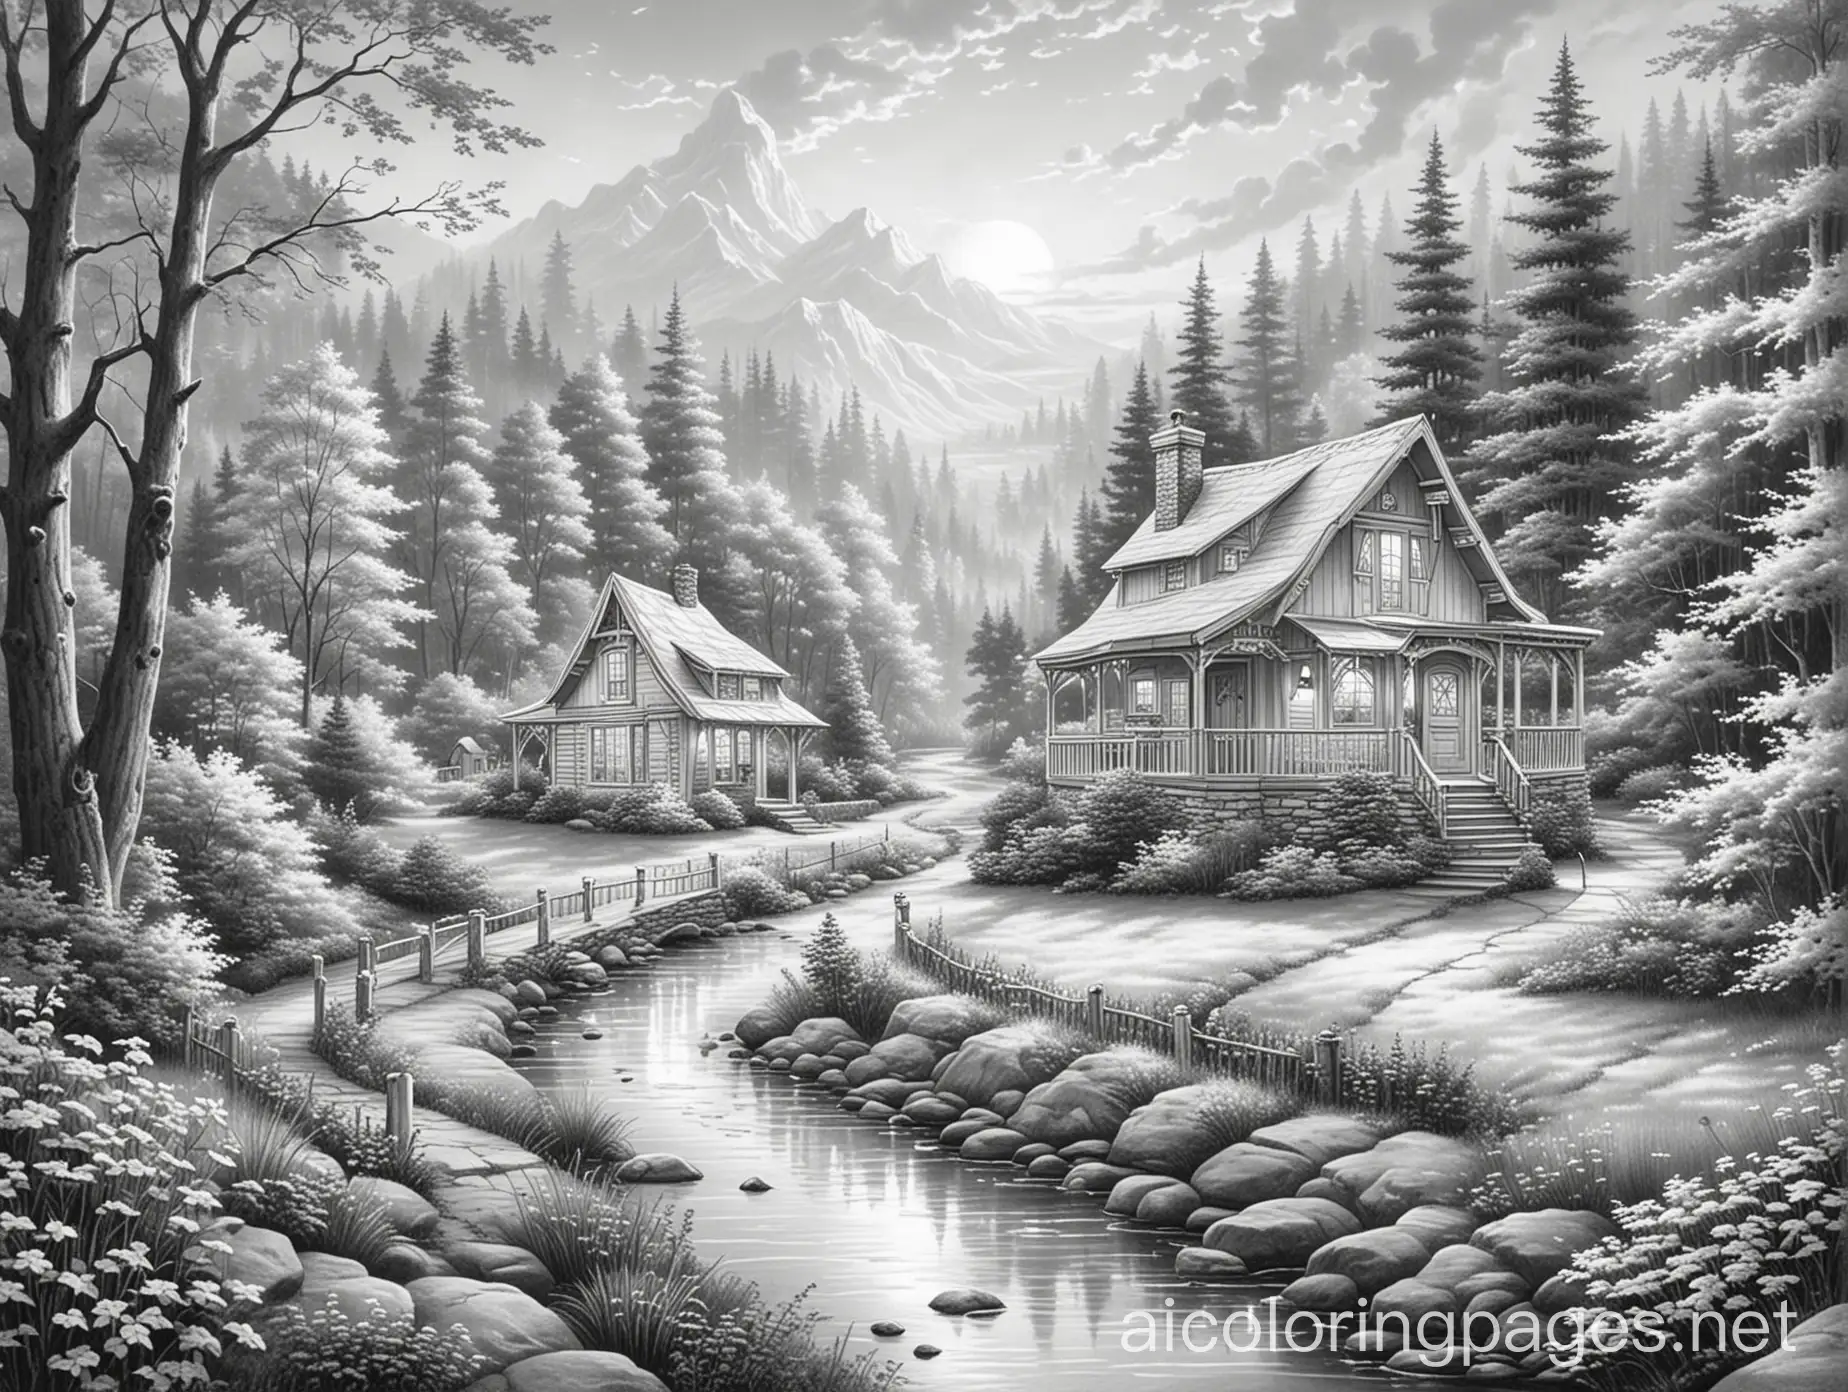 MAKE A PICTURE LIKE THOMAS KINKADE
, Coloring Page, black and white, line art, white background, Simplicity, Ample White Space. The background of the coloring page is plain white to make it easy for young children to color within the lines. The outlines of all the subjects are easy to distinguish, making it simple for kids to color without too much difficulty